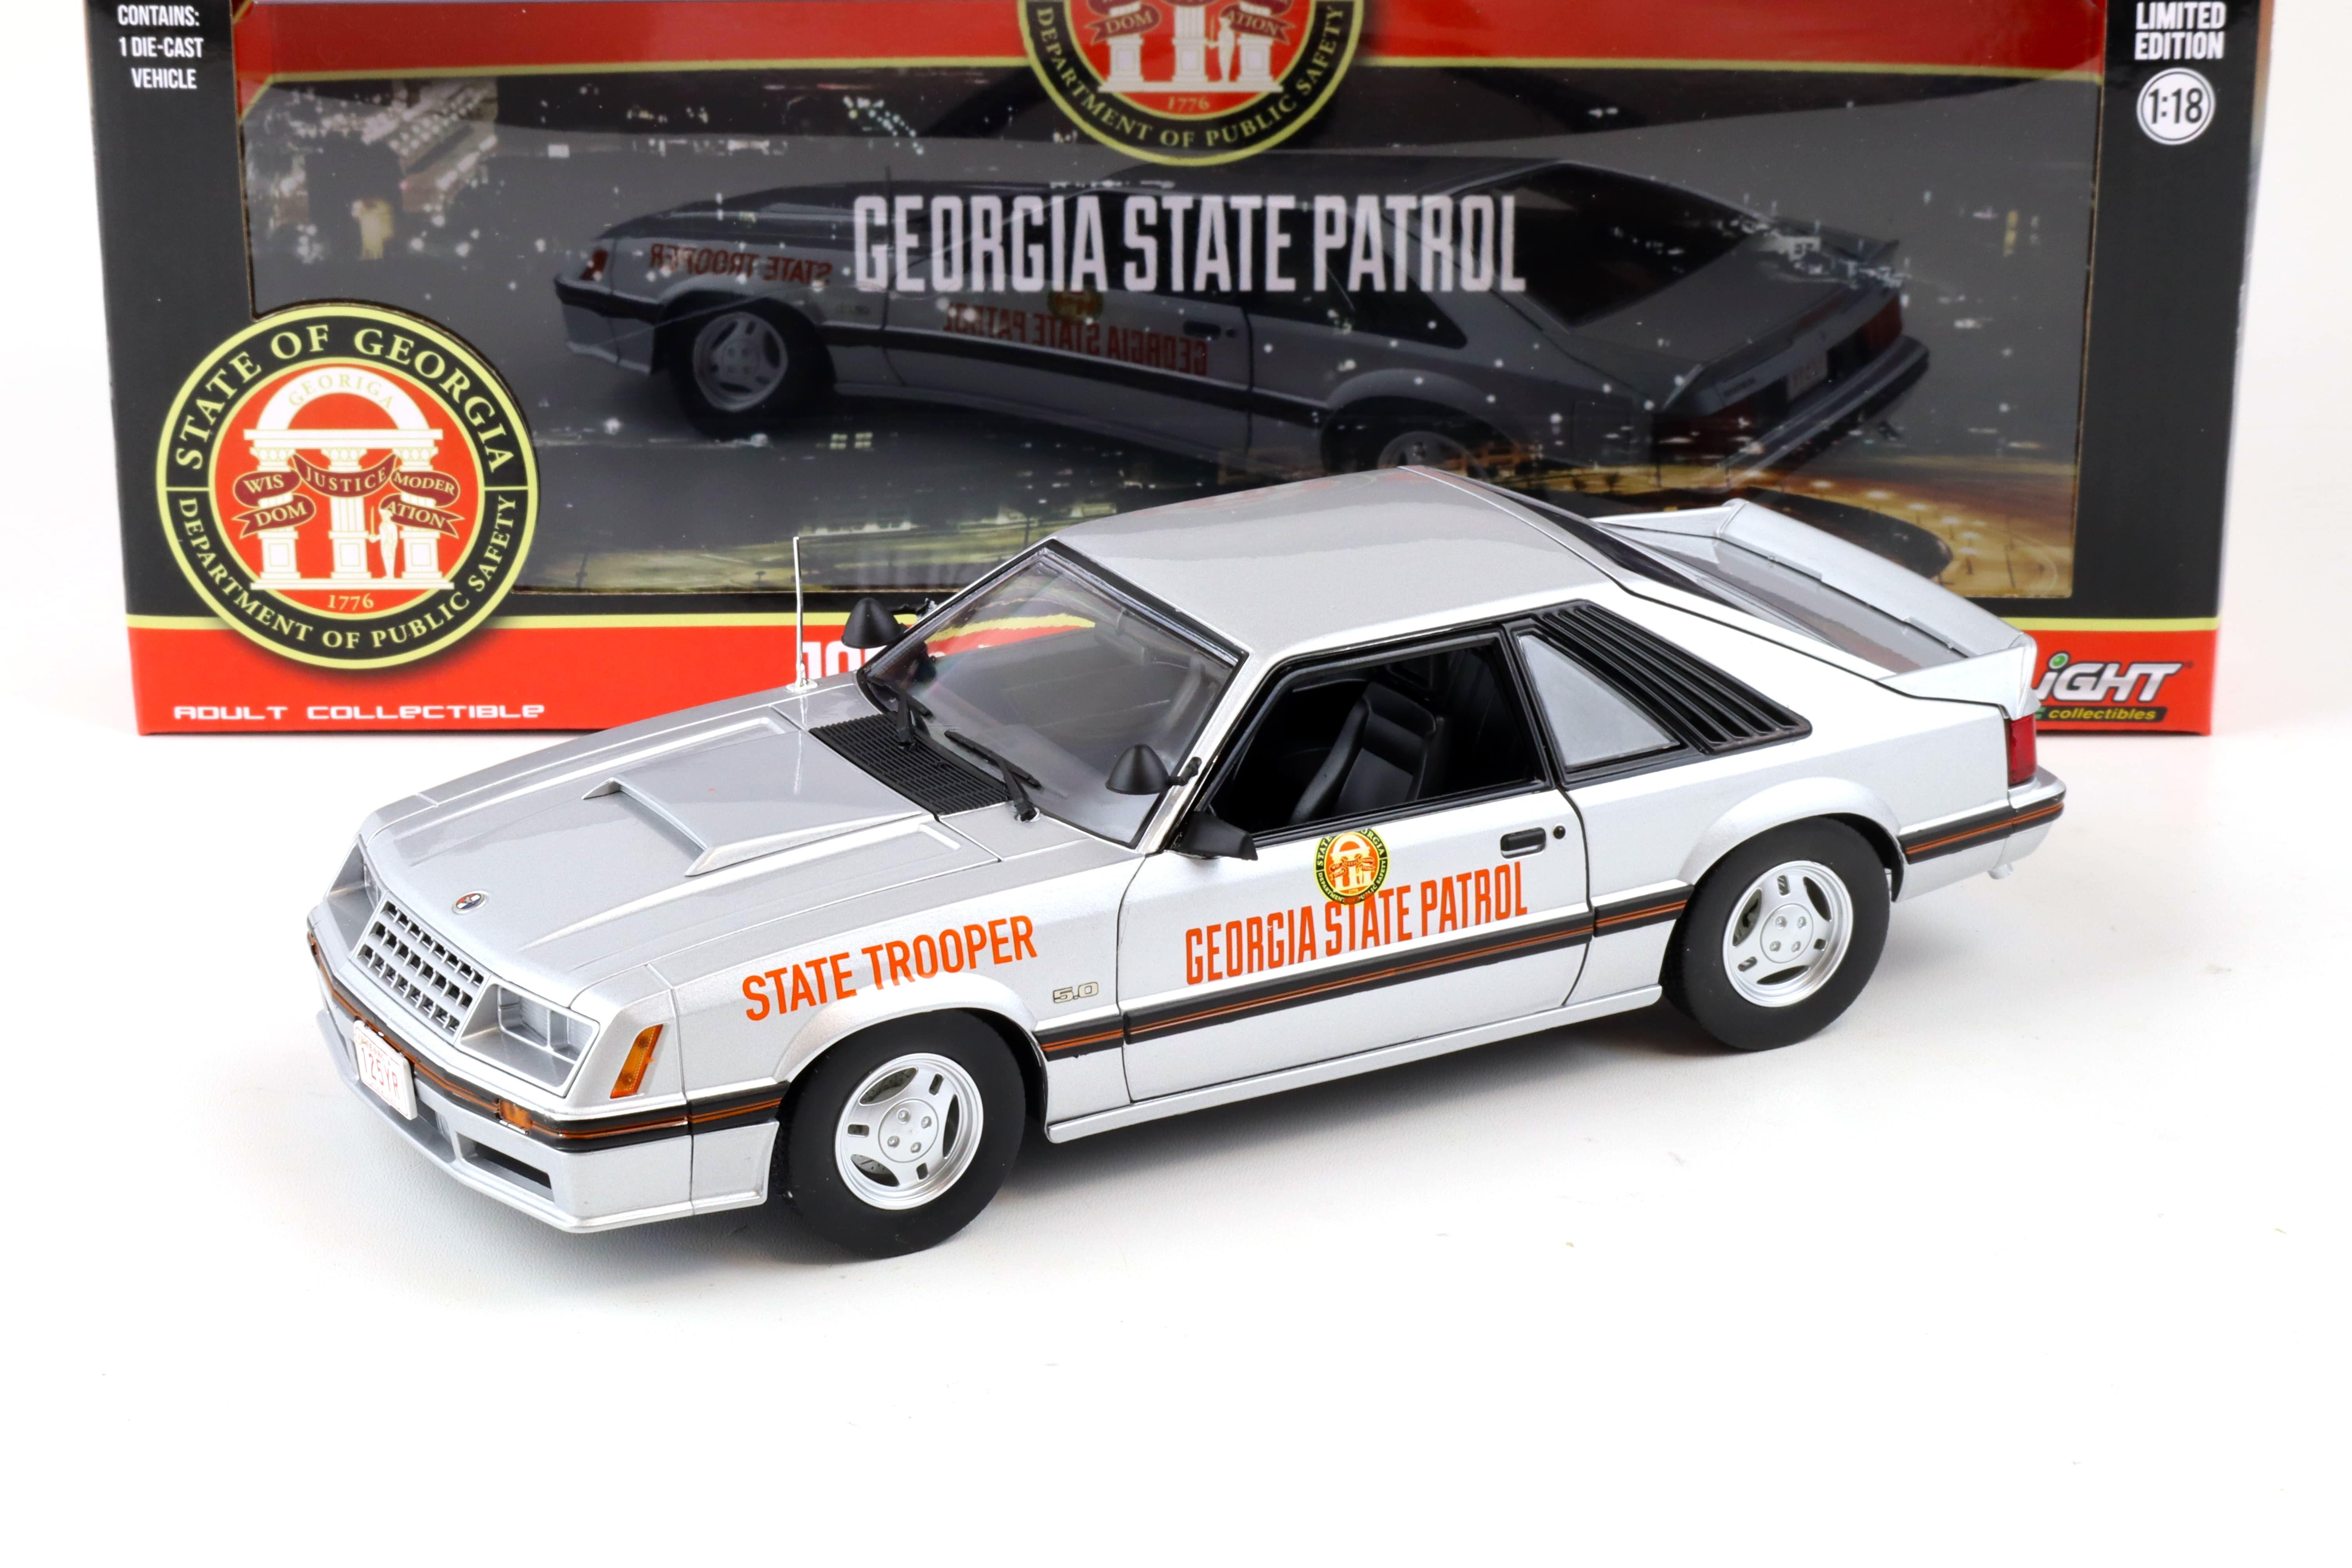 1:18 Greenlight 1982 Ford Mustang GT 5.0 Coupe SSP Georgia State Patrol State Trooper